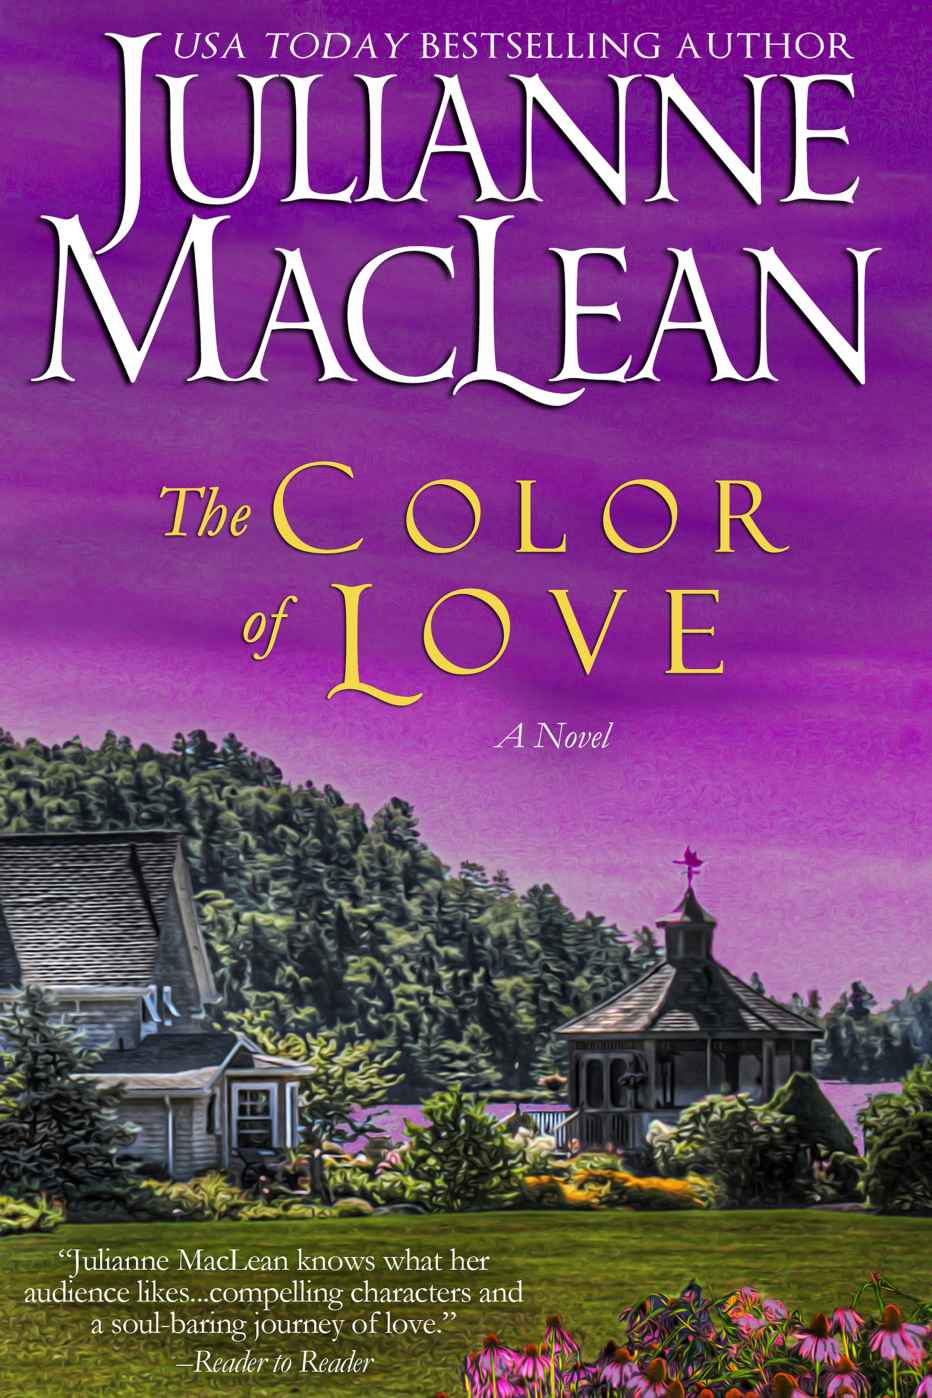 The Color of Love (The Color of Heaven Series) by Julianne MacLean